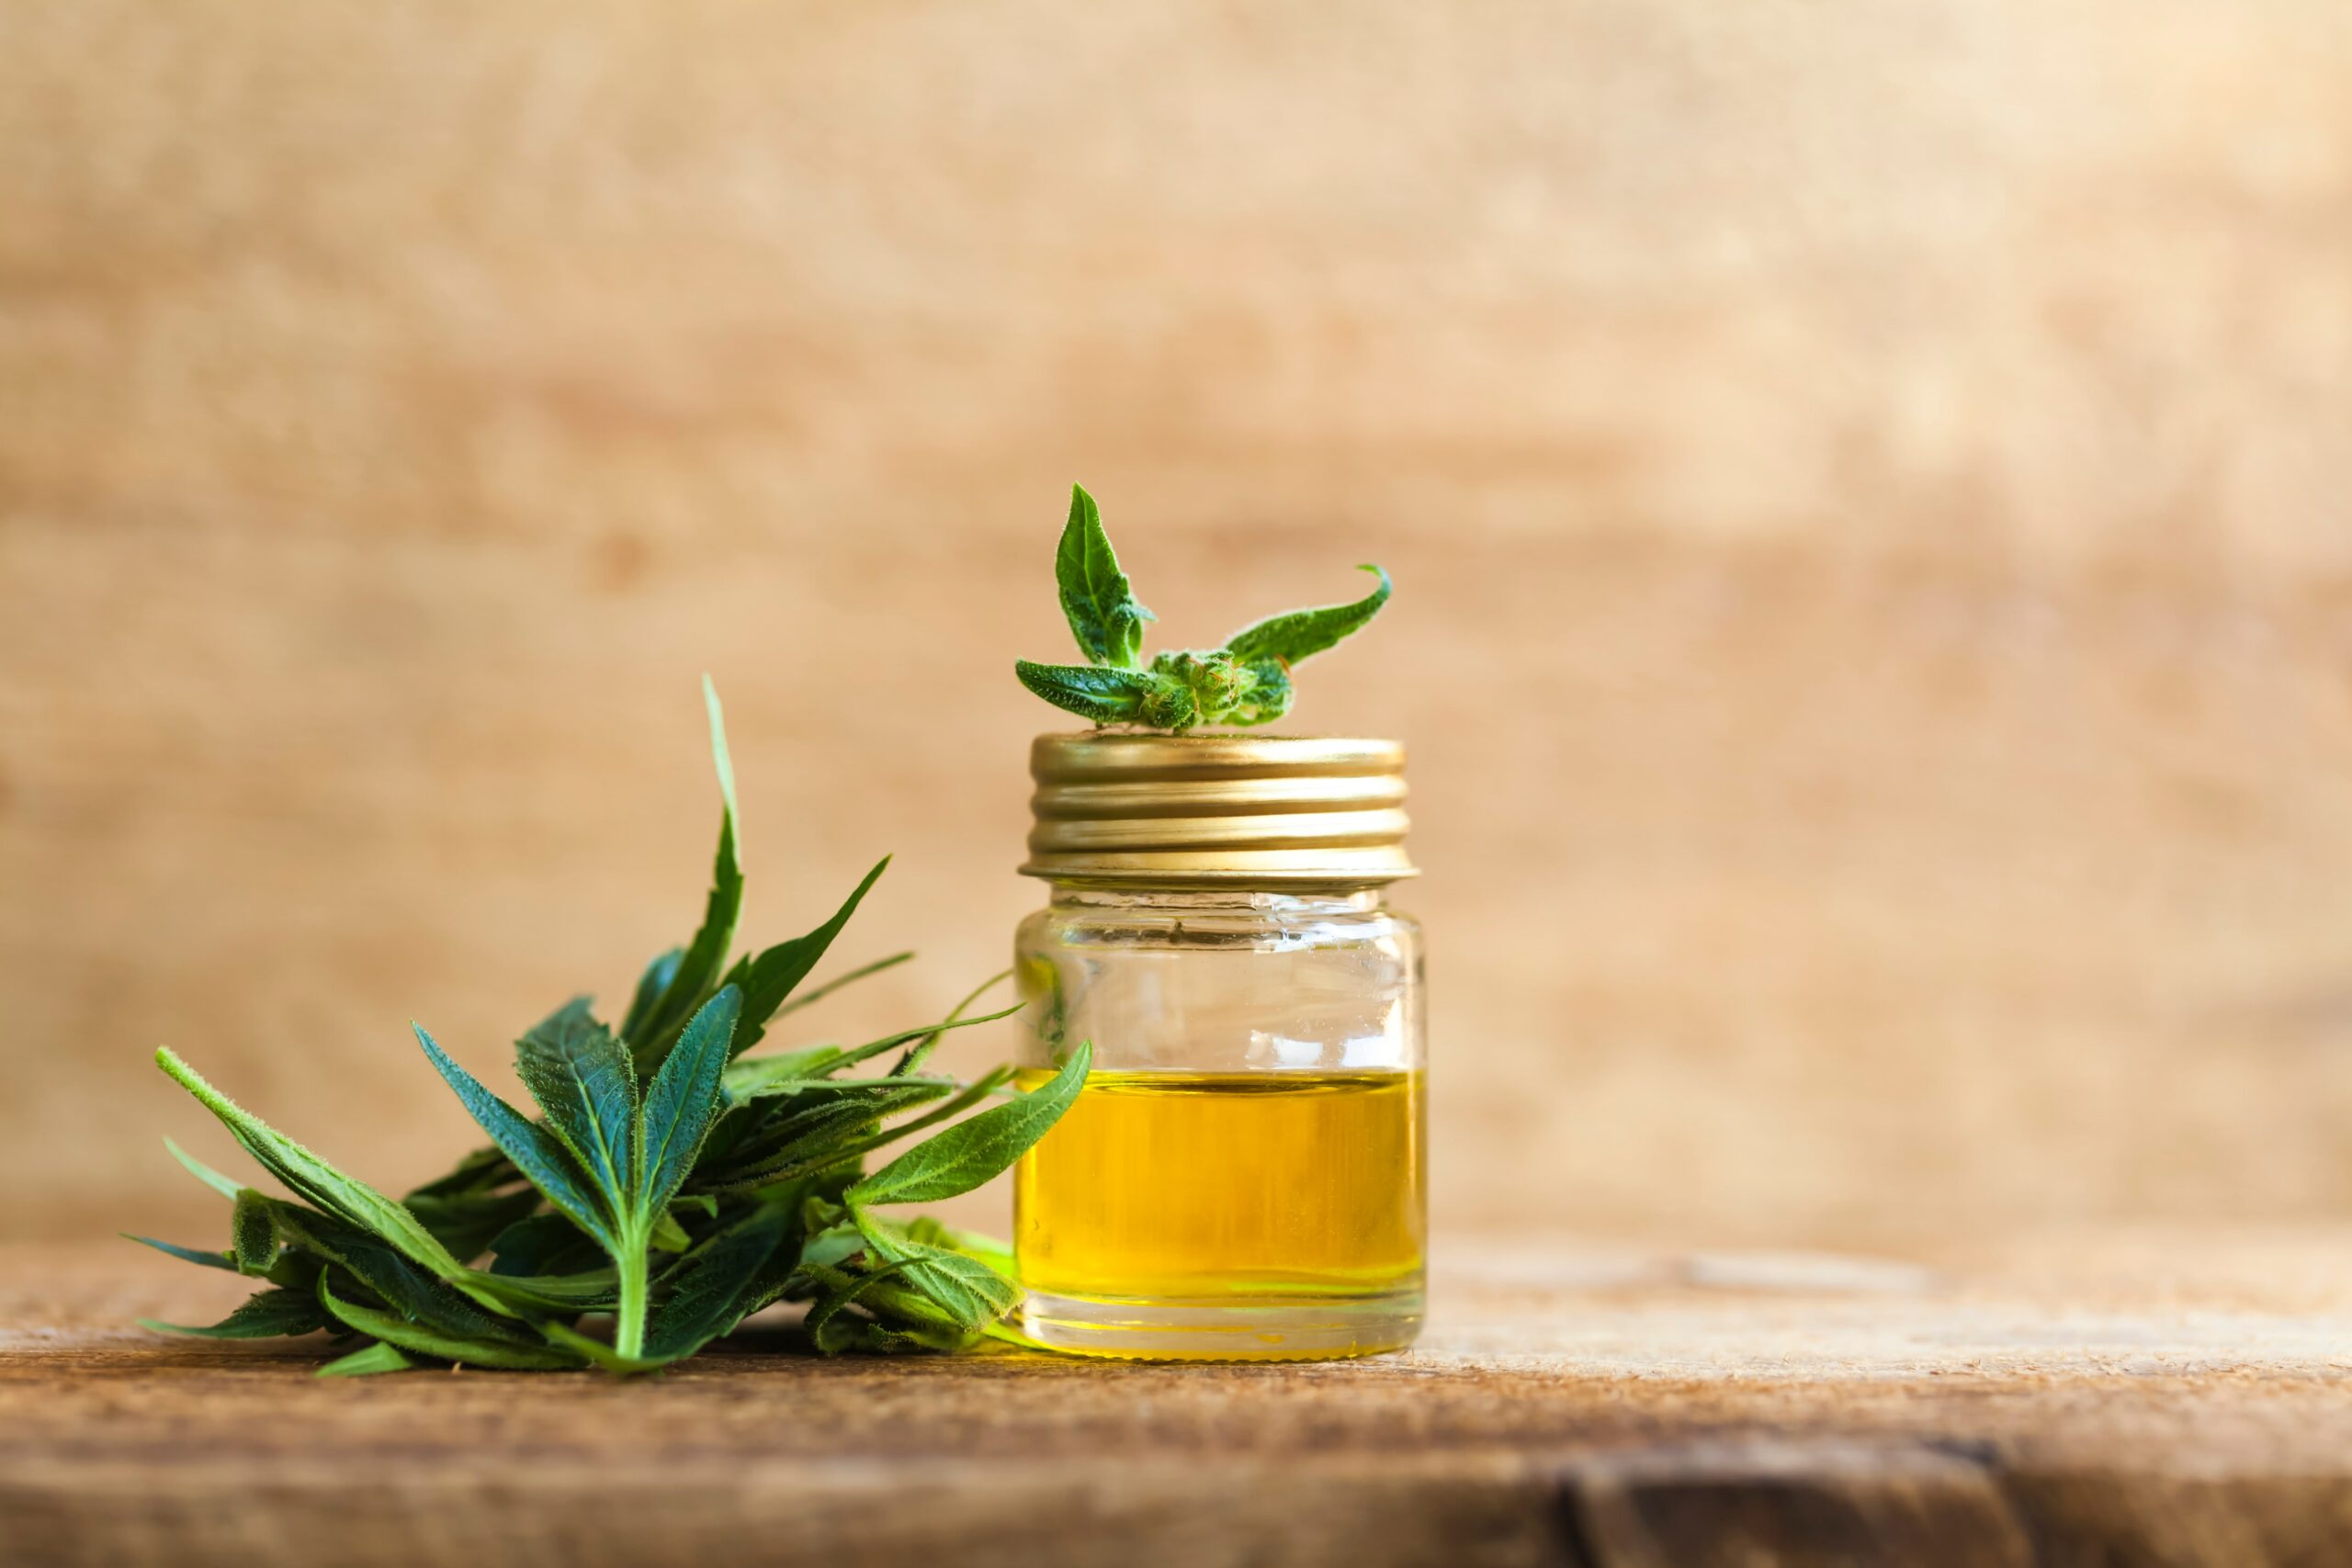 Can You Use Oral CBD Oil Topically